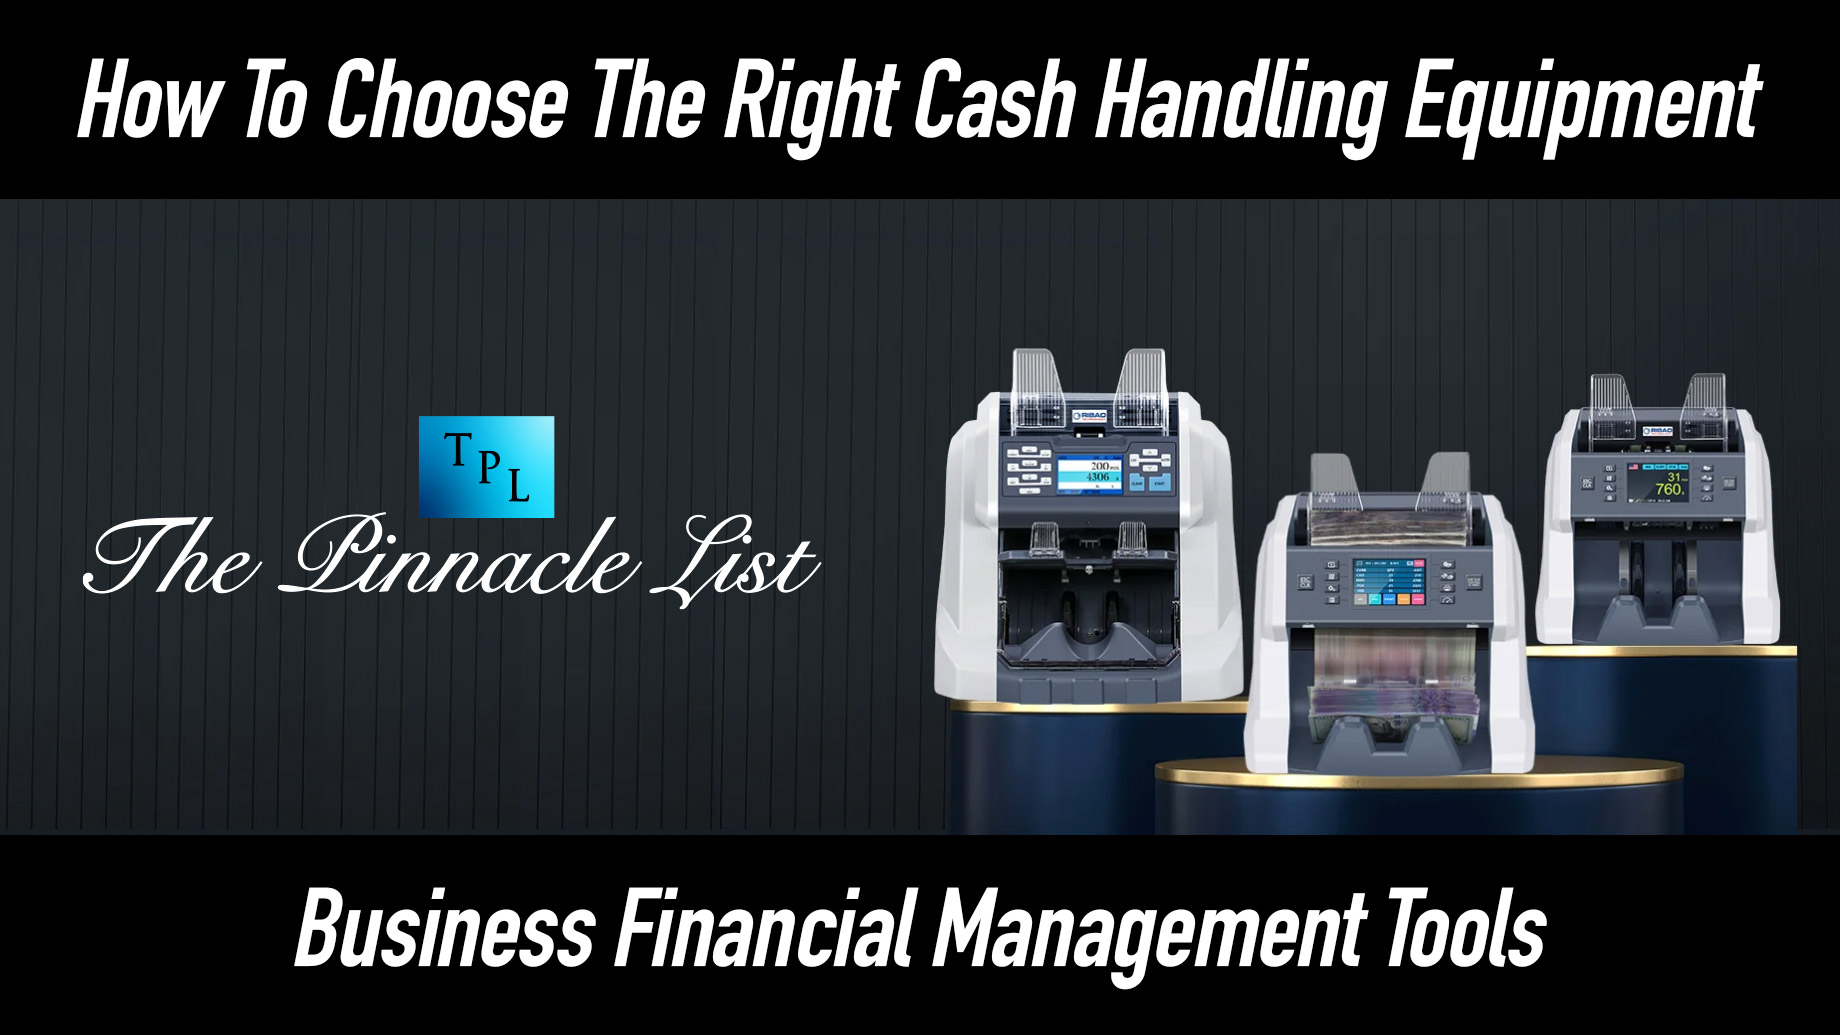 How To Choose The Right Cash Handling Equipment For Your Business